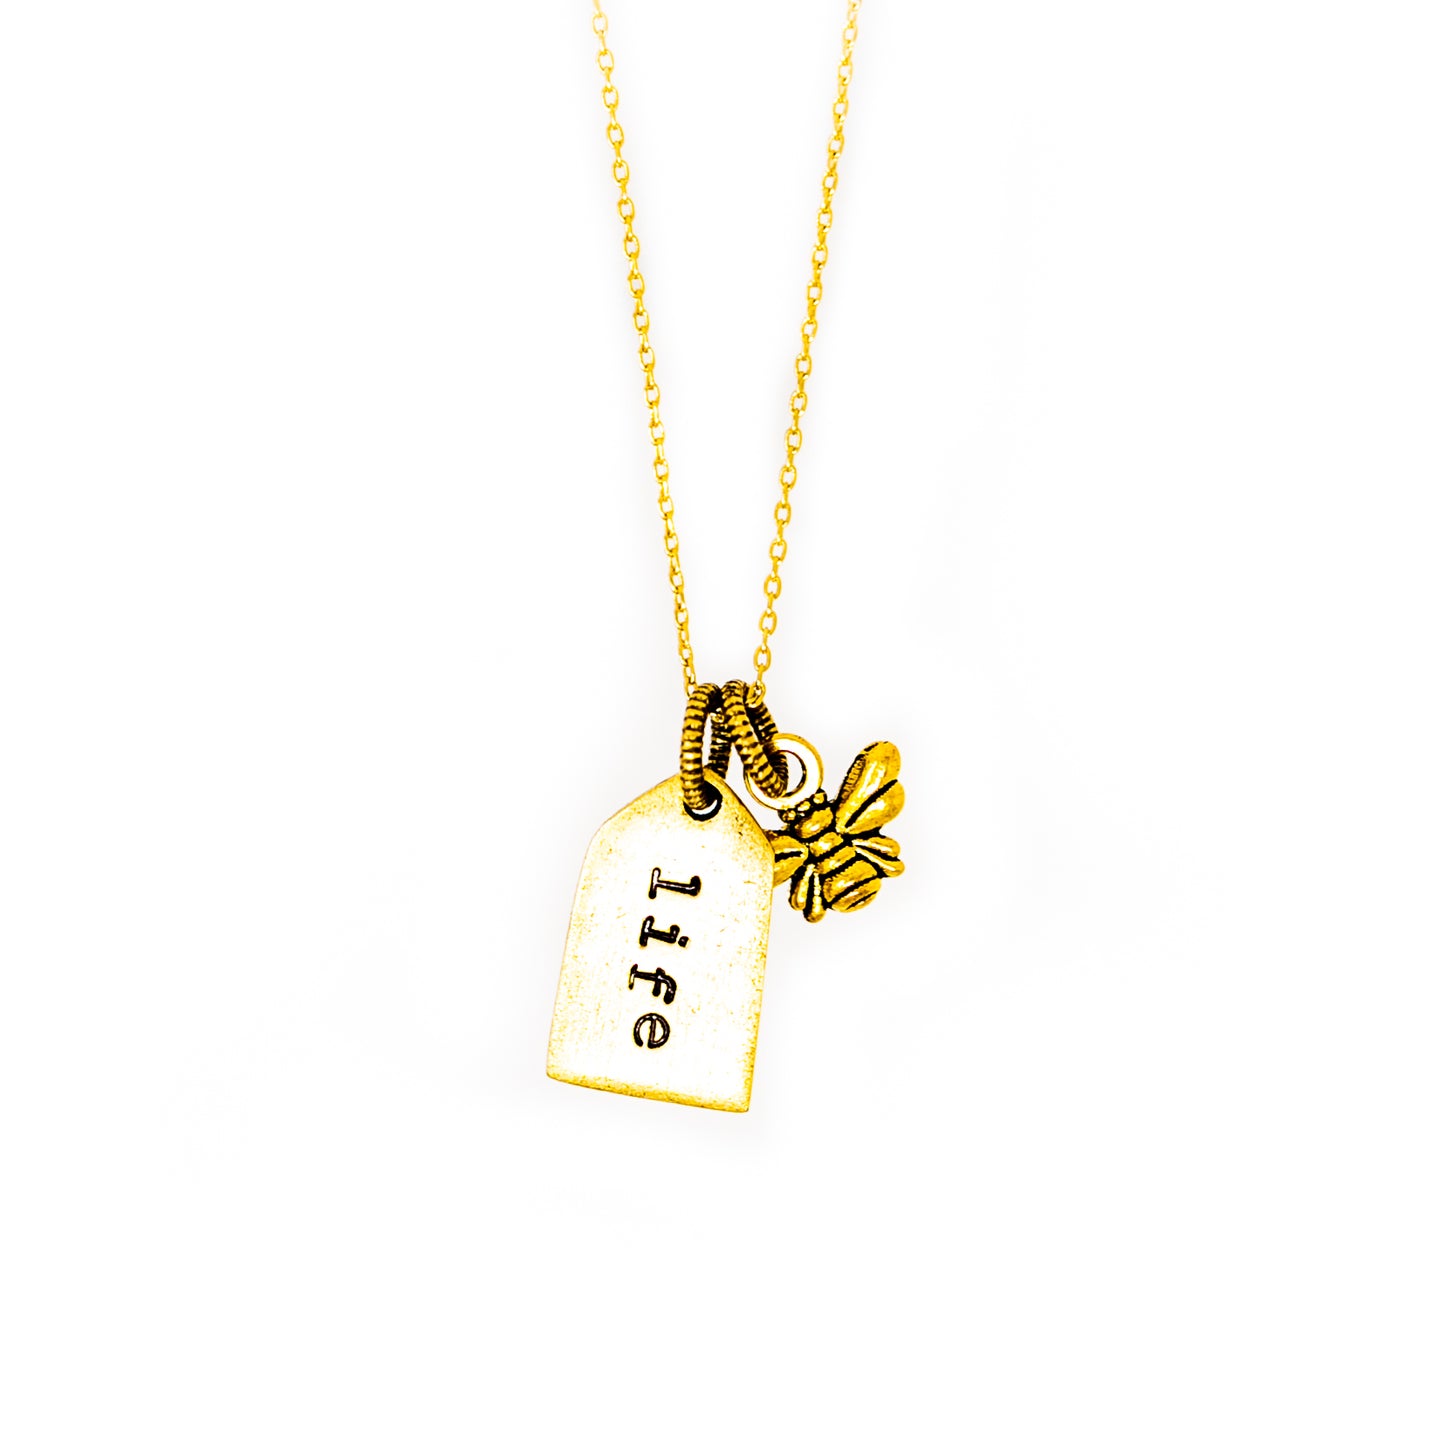 Heaven Inspired Soco Necklace - Gold